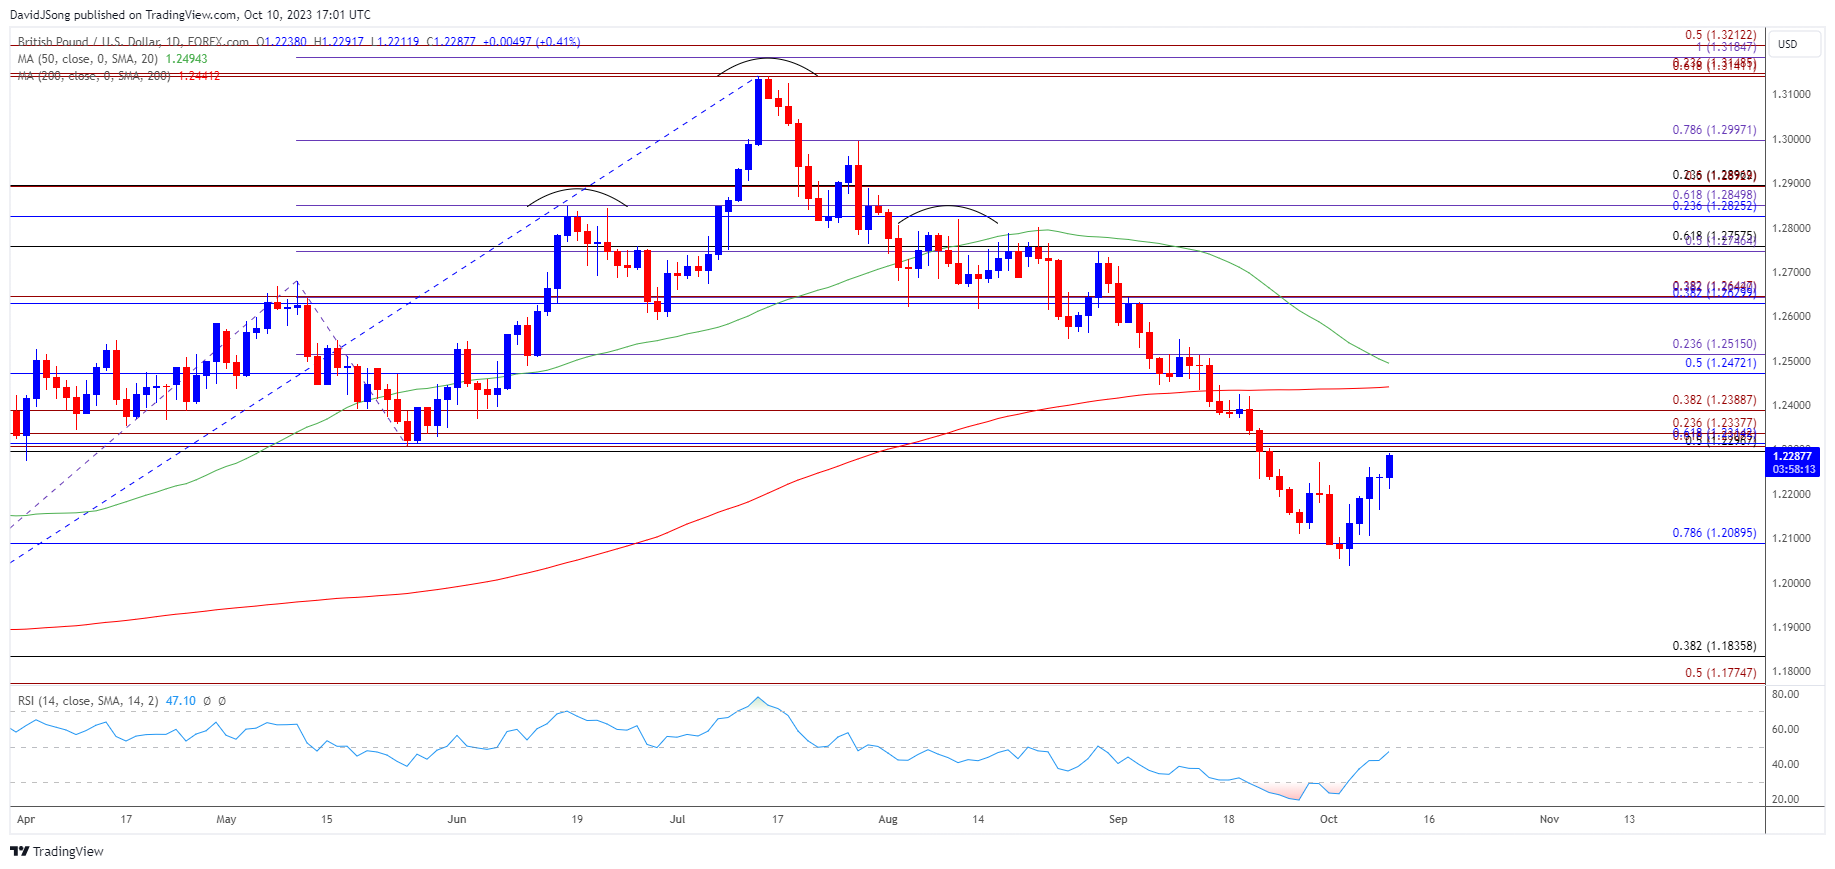 AUD/USD Outlook Hinges on Reaction to Negative Slope in 50-Day SMA